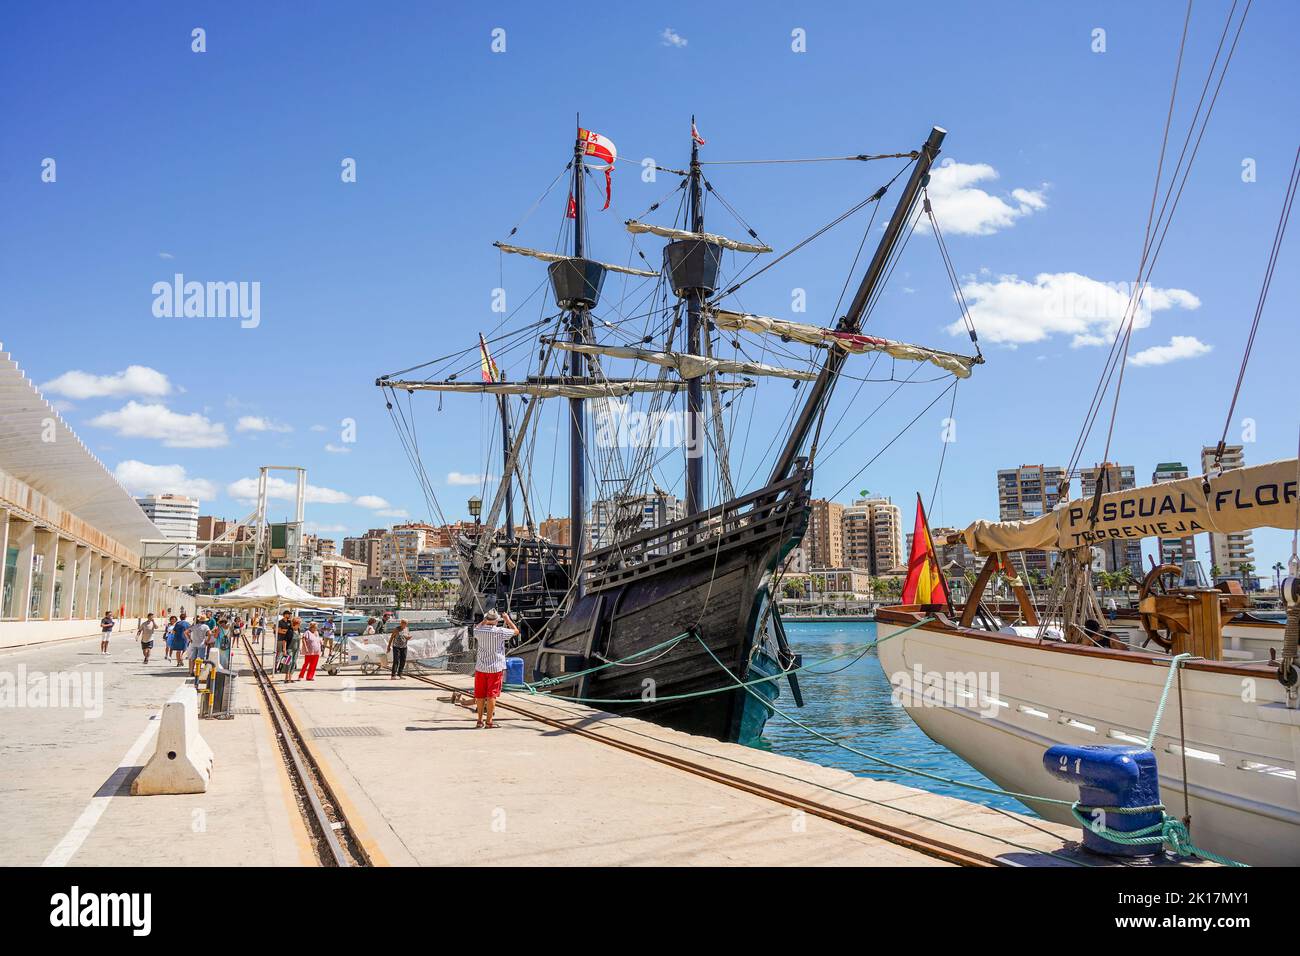 Andalusian Galleon, sailing replica of a 16th-17th century galleon, moored in the port of Malaga, Spain. Stock Photo